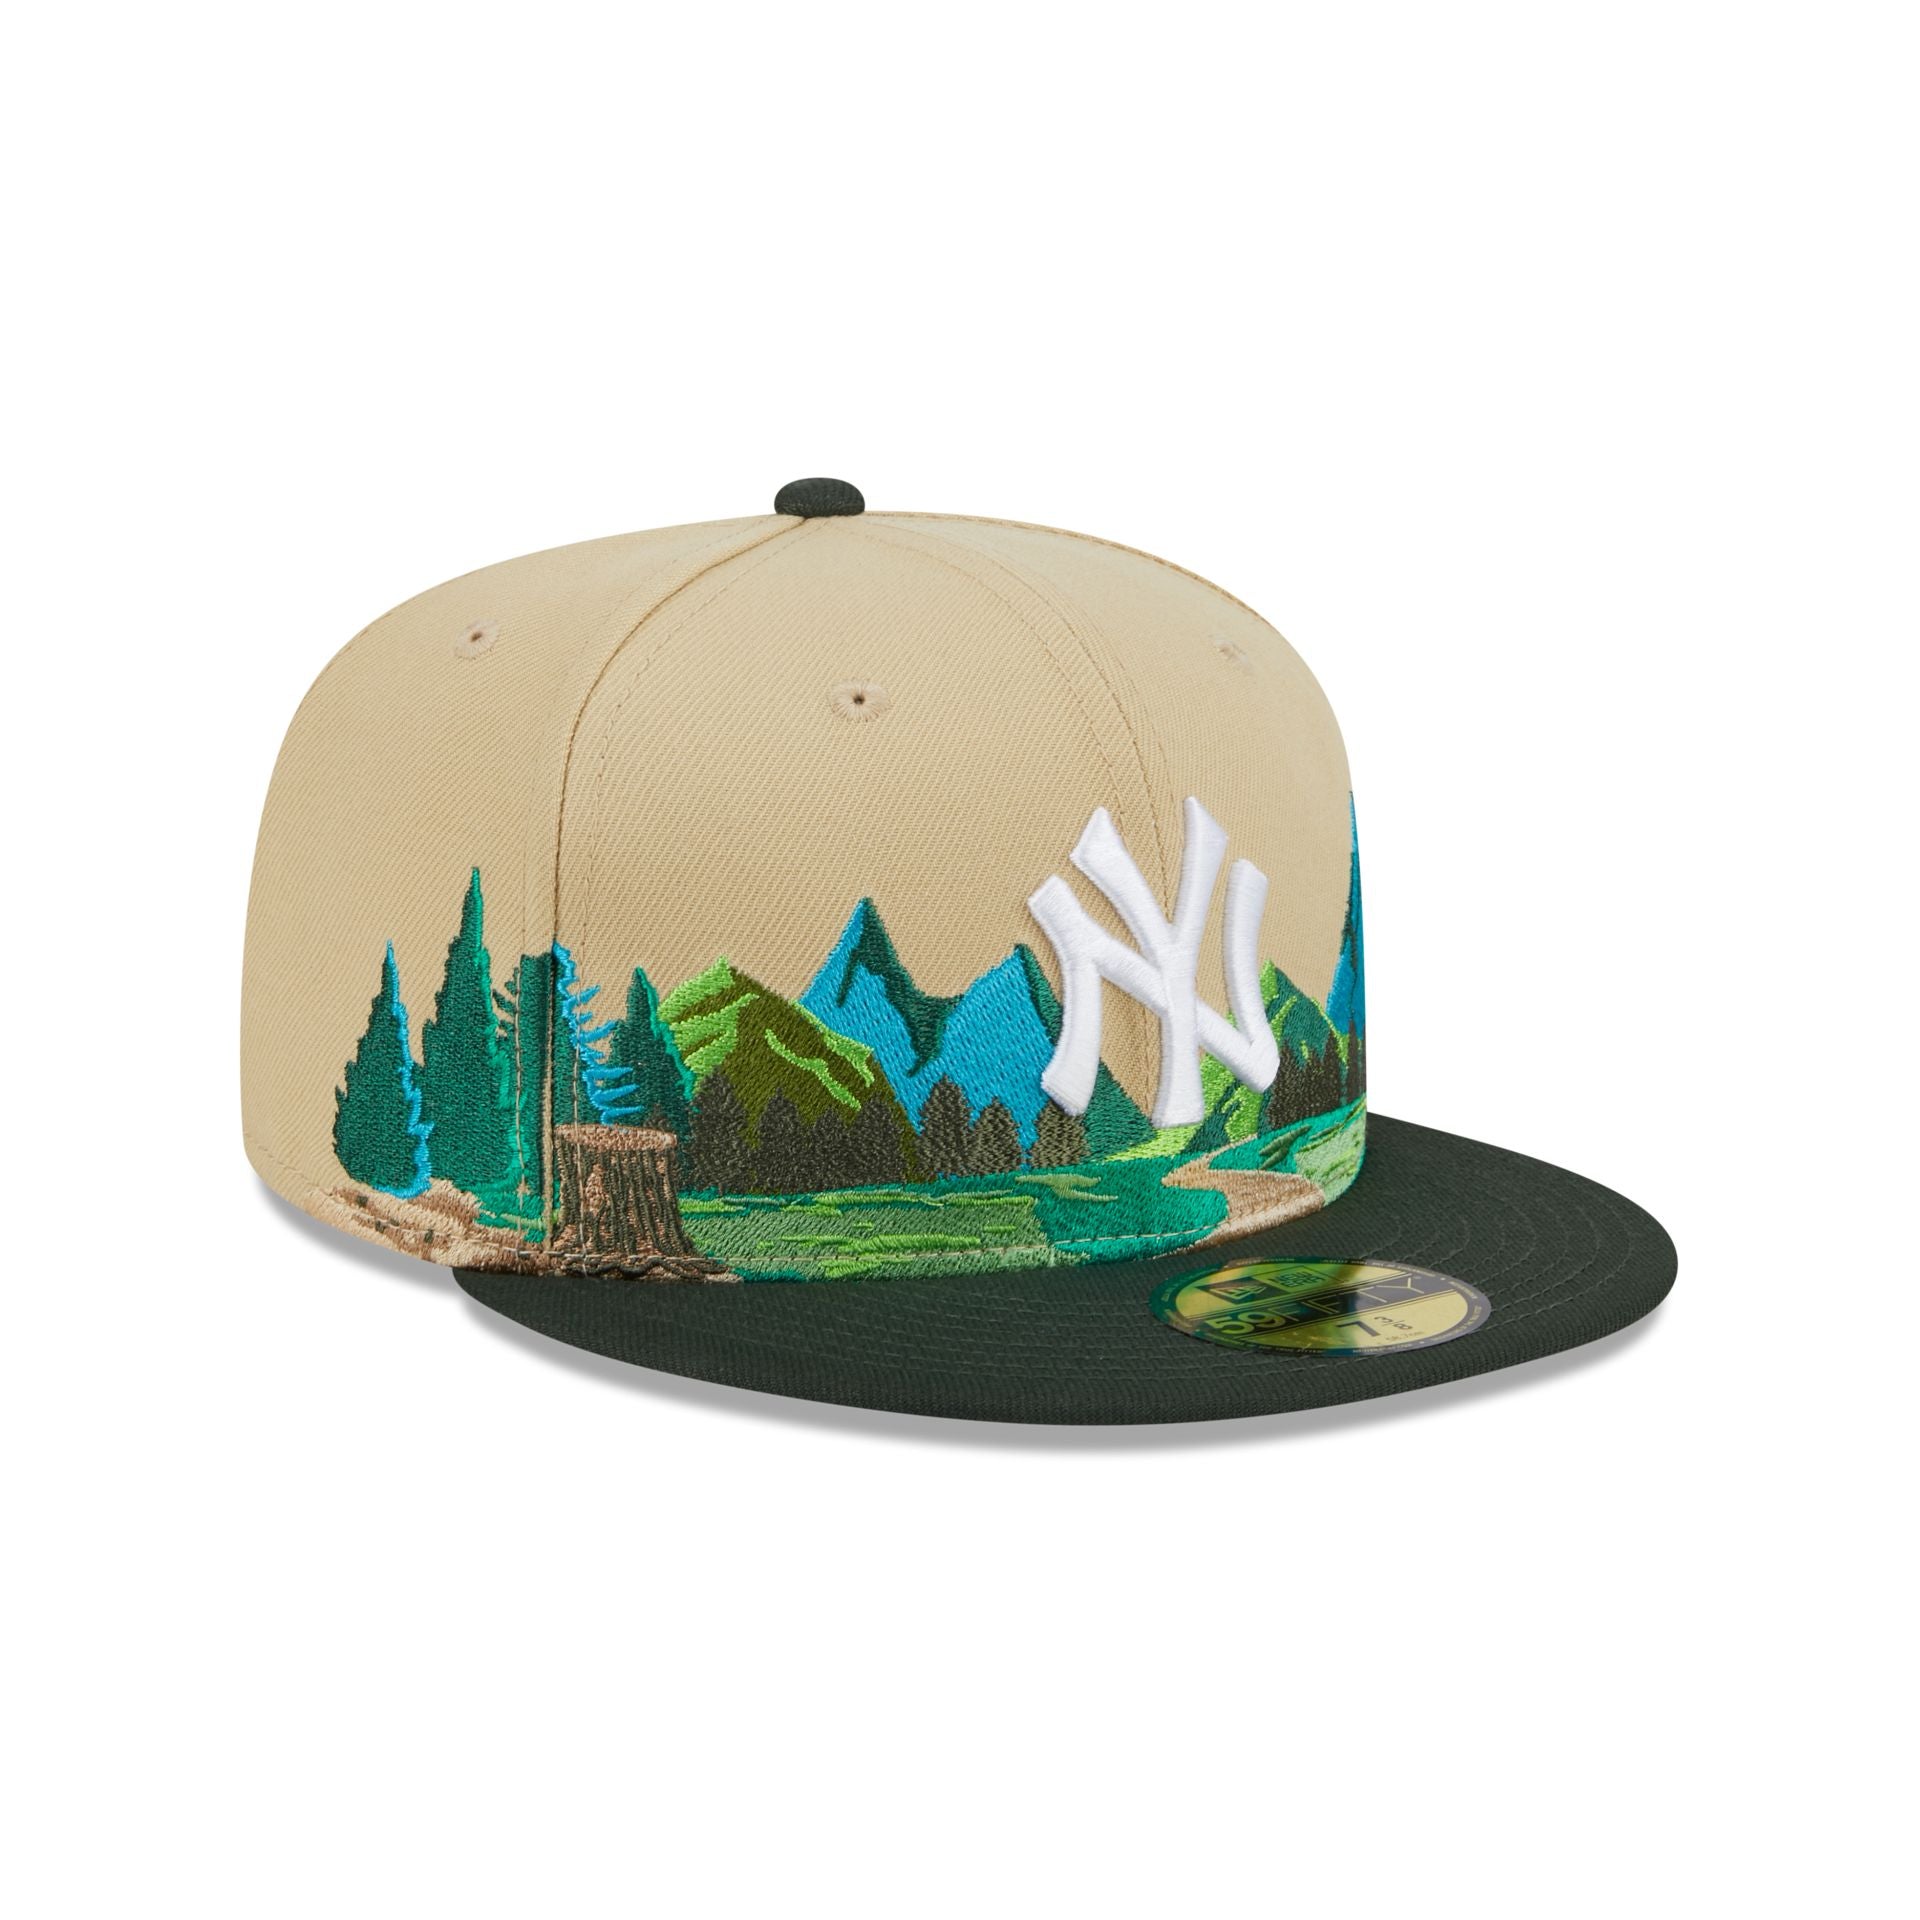 New Era Flat Brim 5950 Team Landscape New York Yankees Brown and Green Fitted Cap